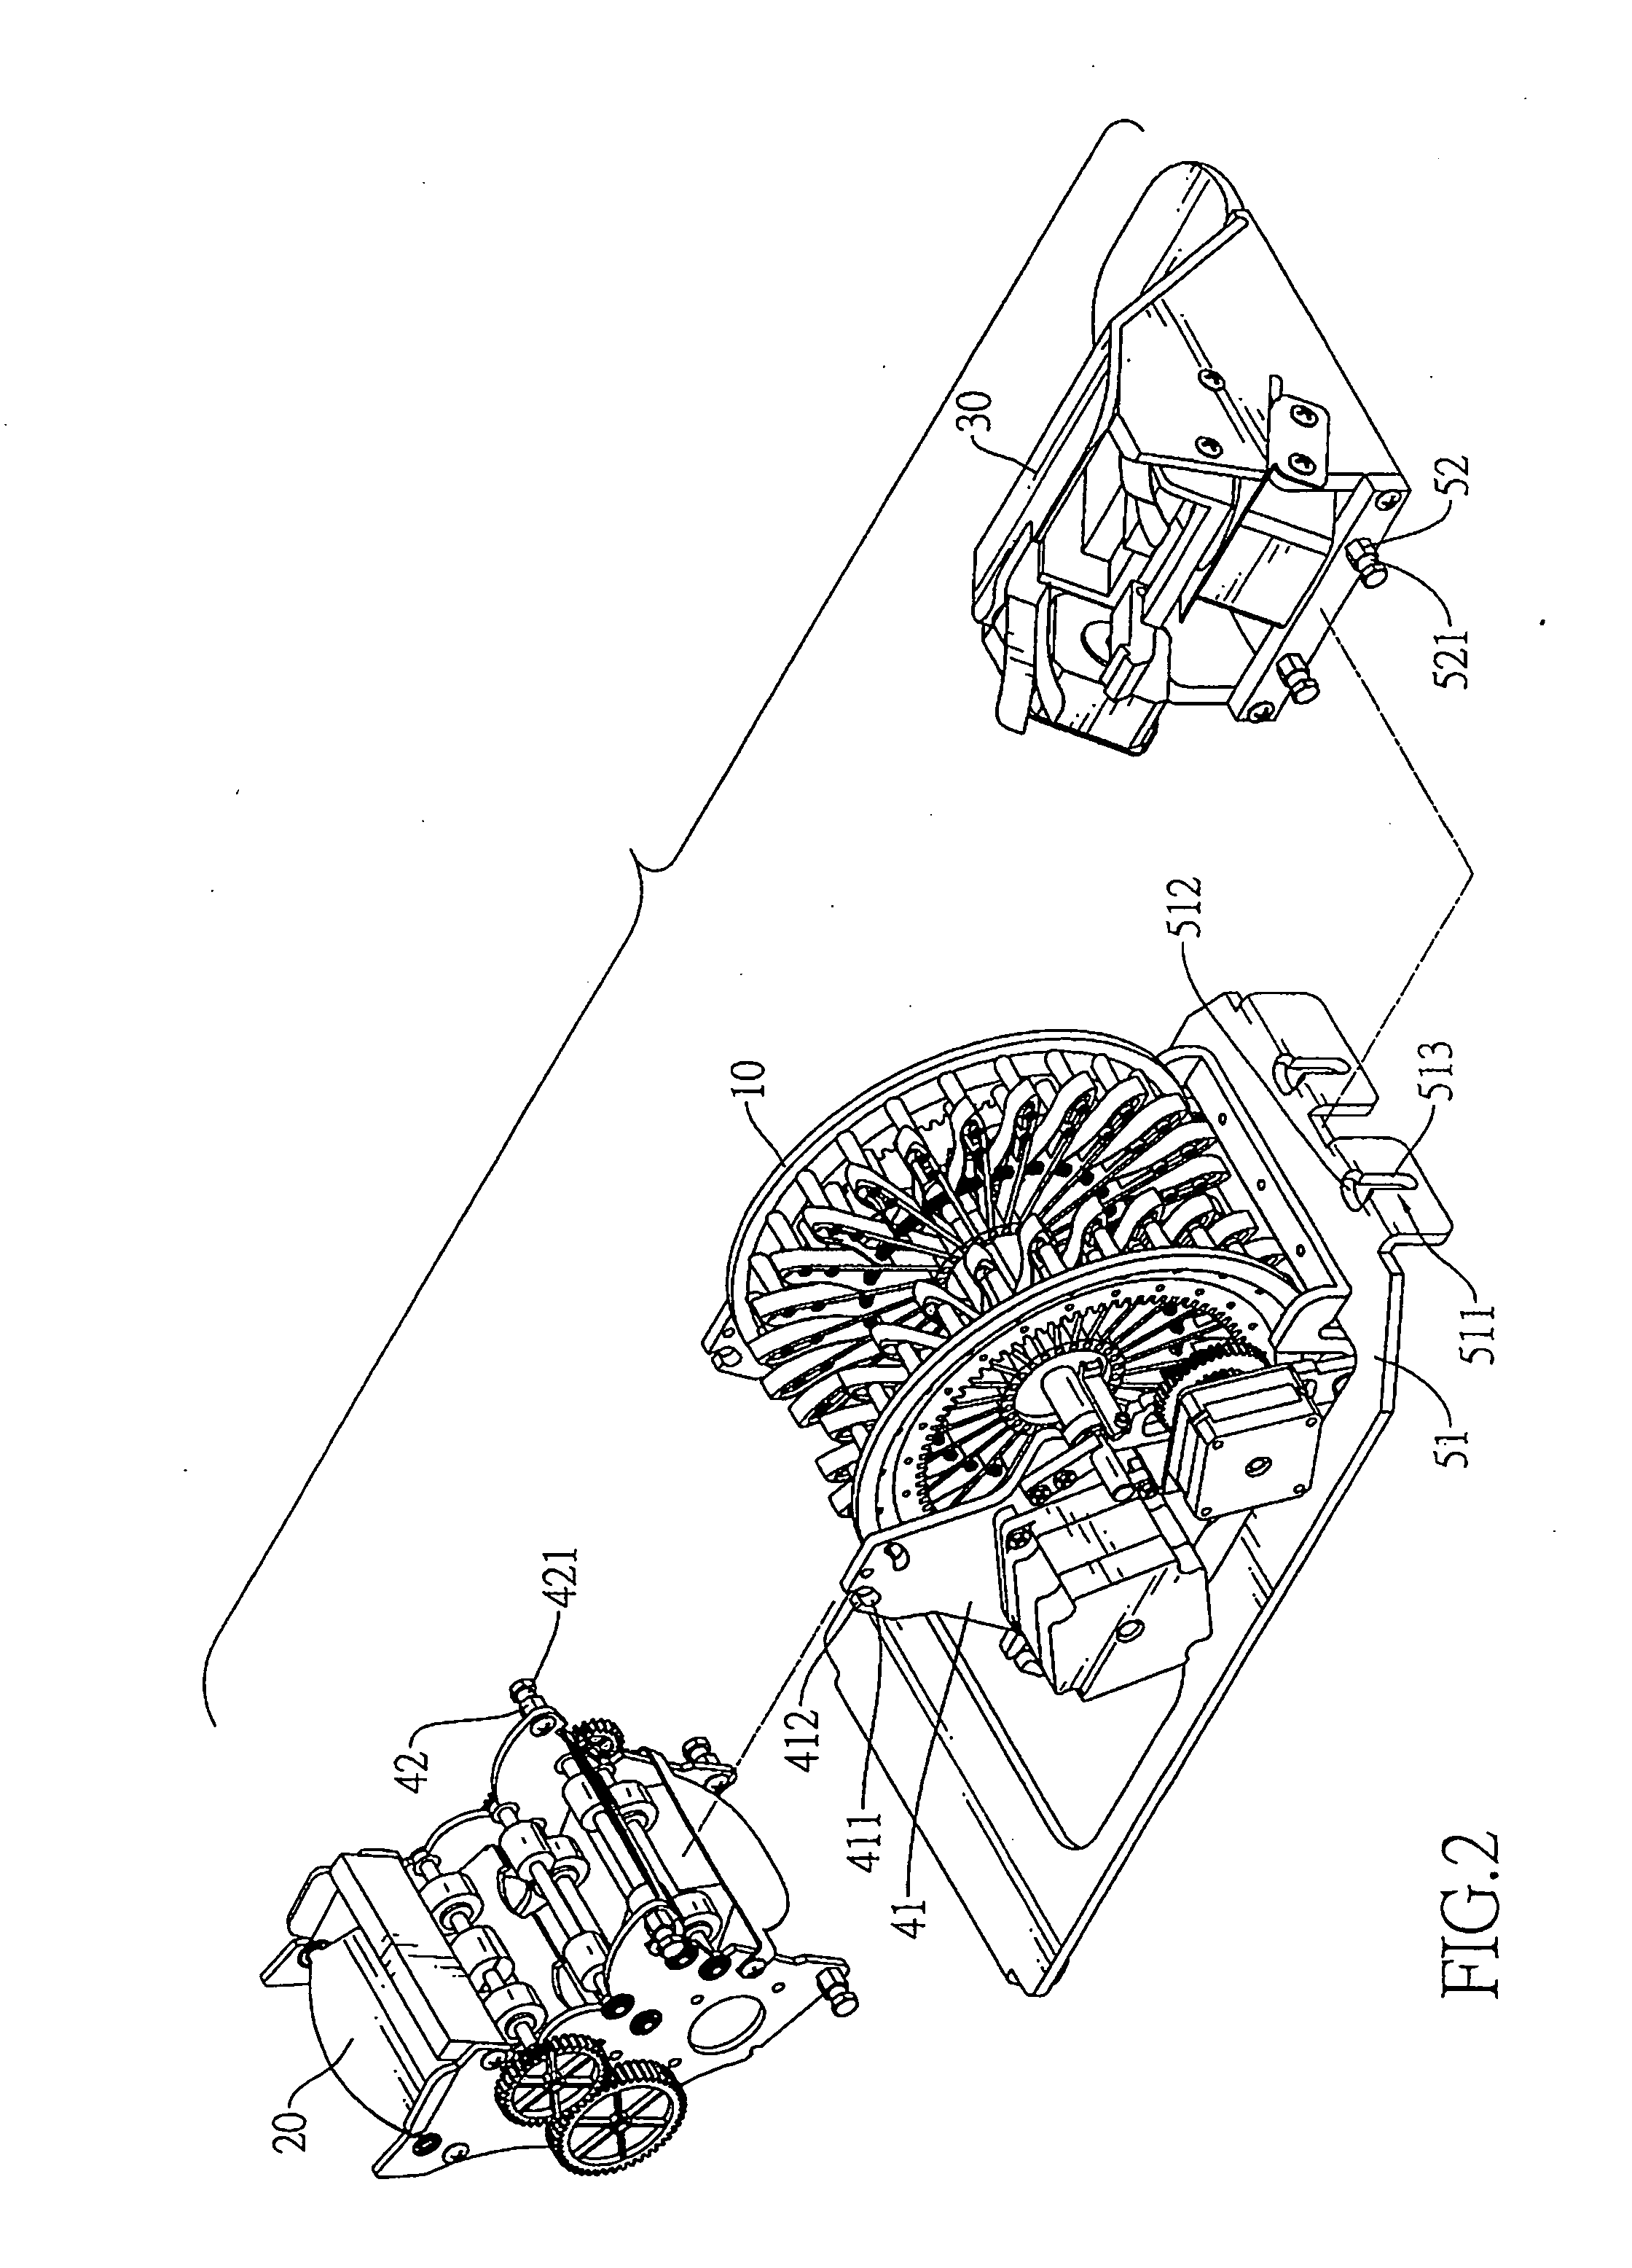 Shuffling machine with a detaching assembly for card input and output